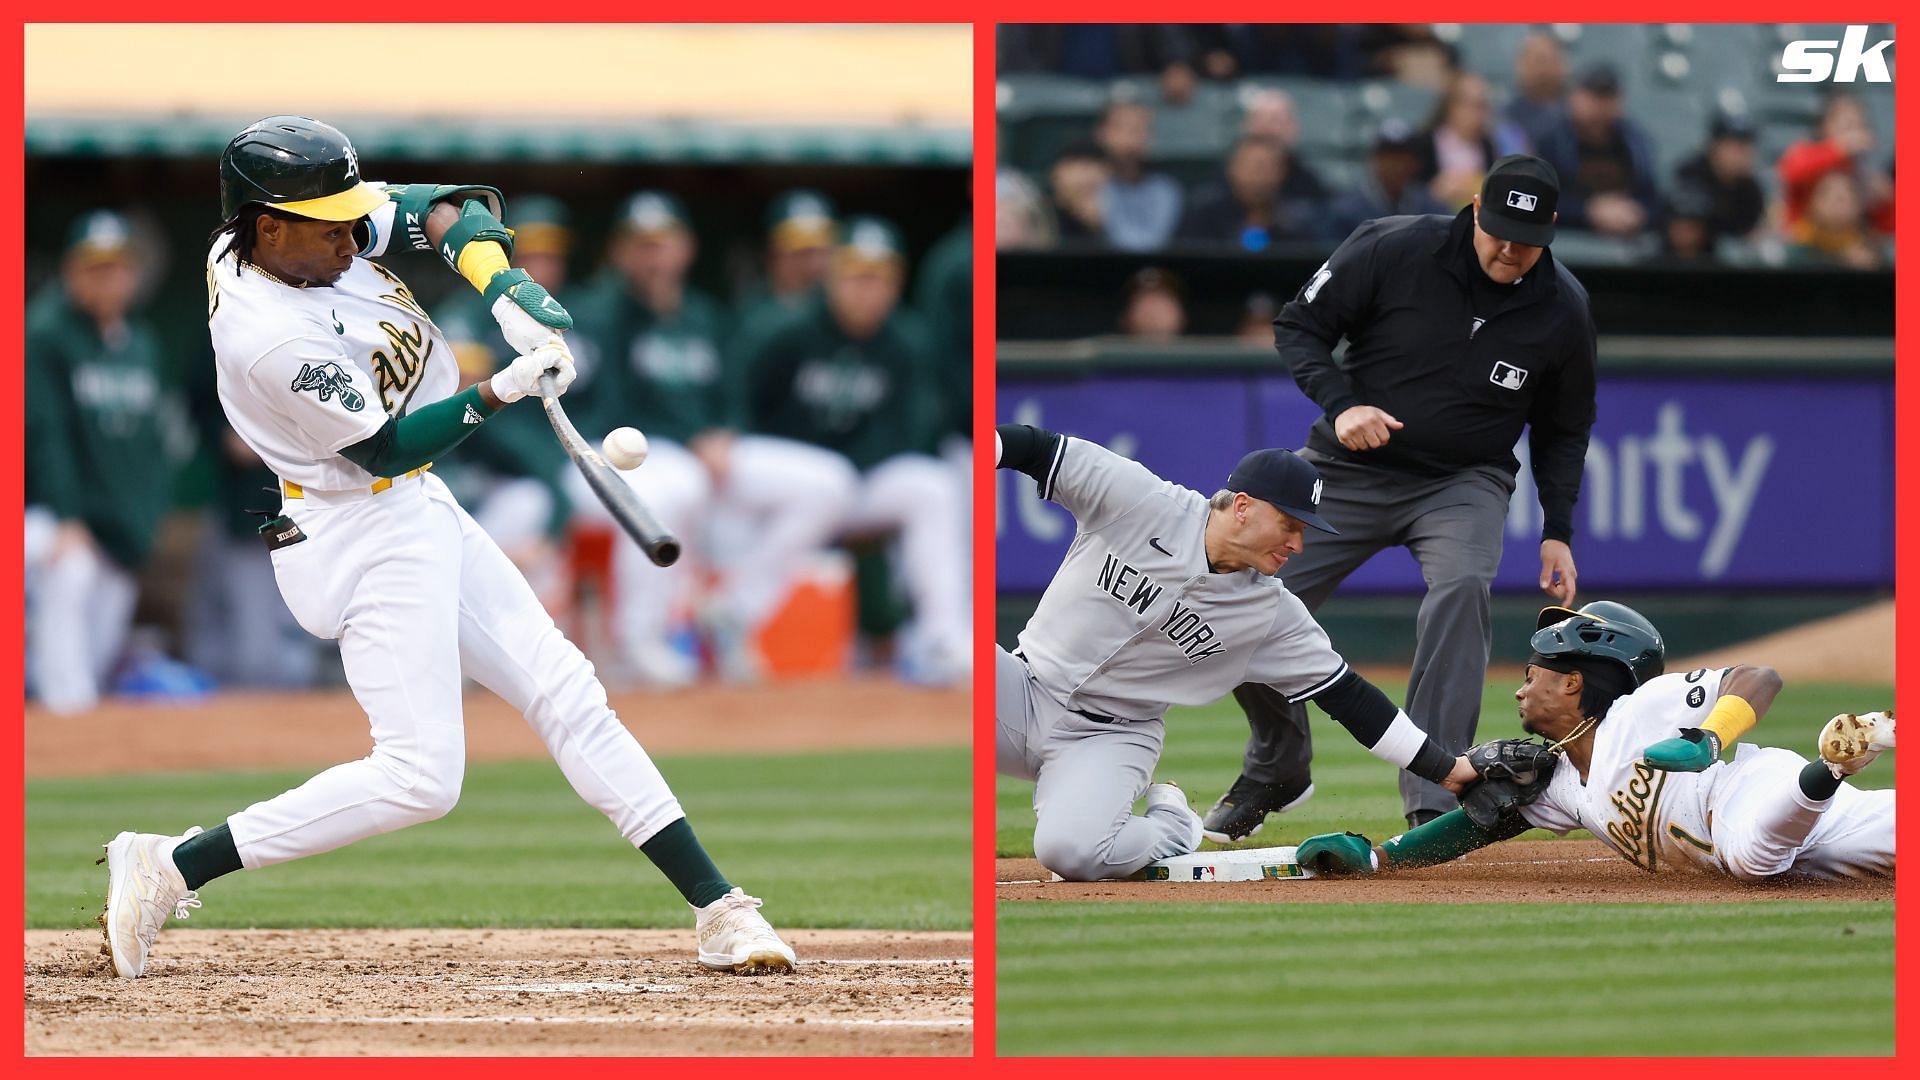 Esteury Ruiz of the Oakland Athletics safely steals second base as Anthony Volpe of the New York Yankees attempts to make a tag in the bottom of the third inning